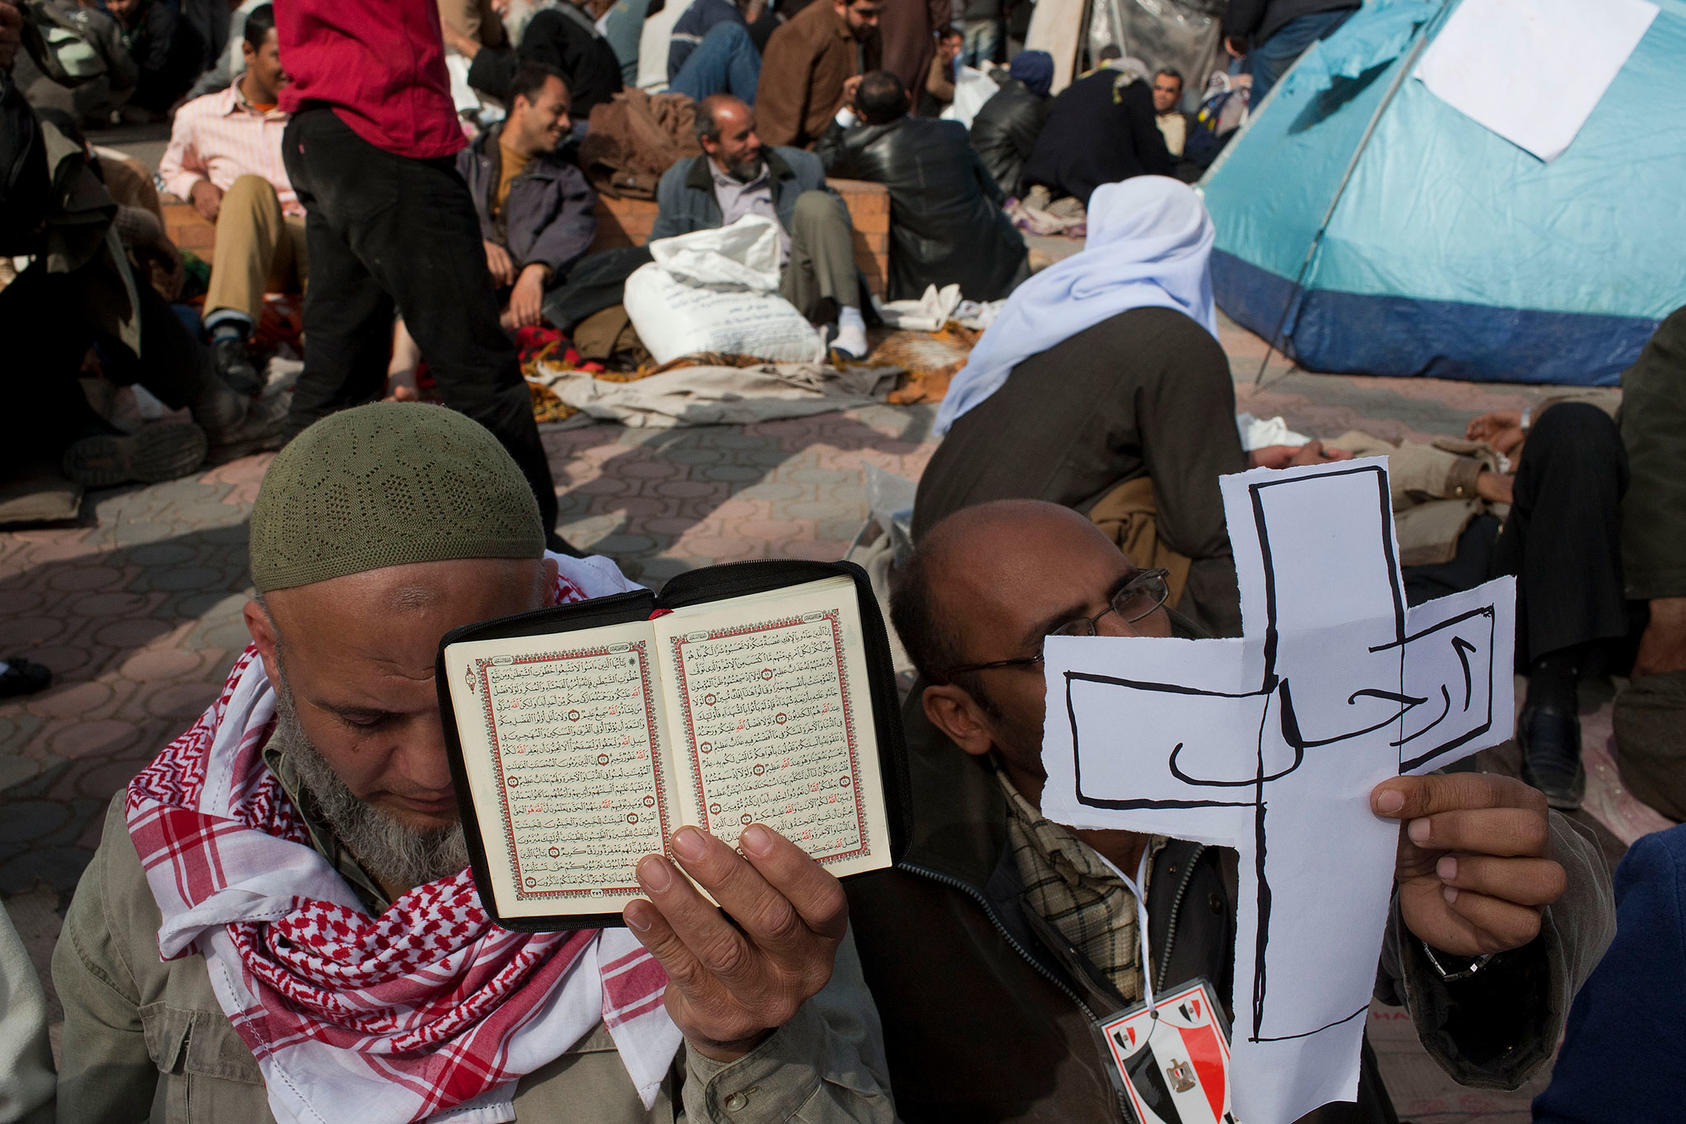 Protesters share a moment of Muslim and Christian unity as they sit nearby makeshift encampments during anti-government protests at Tahrir Square in Cairo. Feb. 6, 2011. (Scott Nelson/The New York Times)